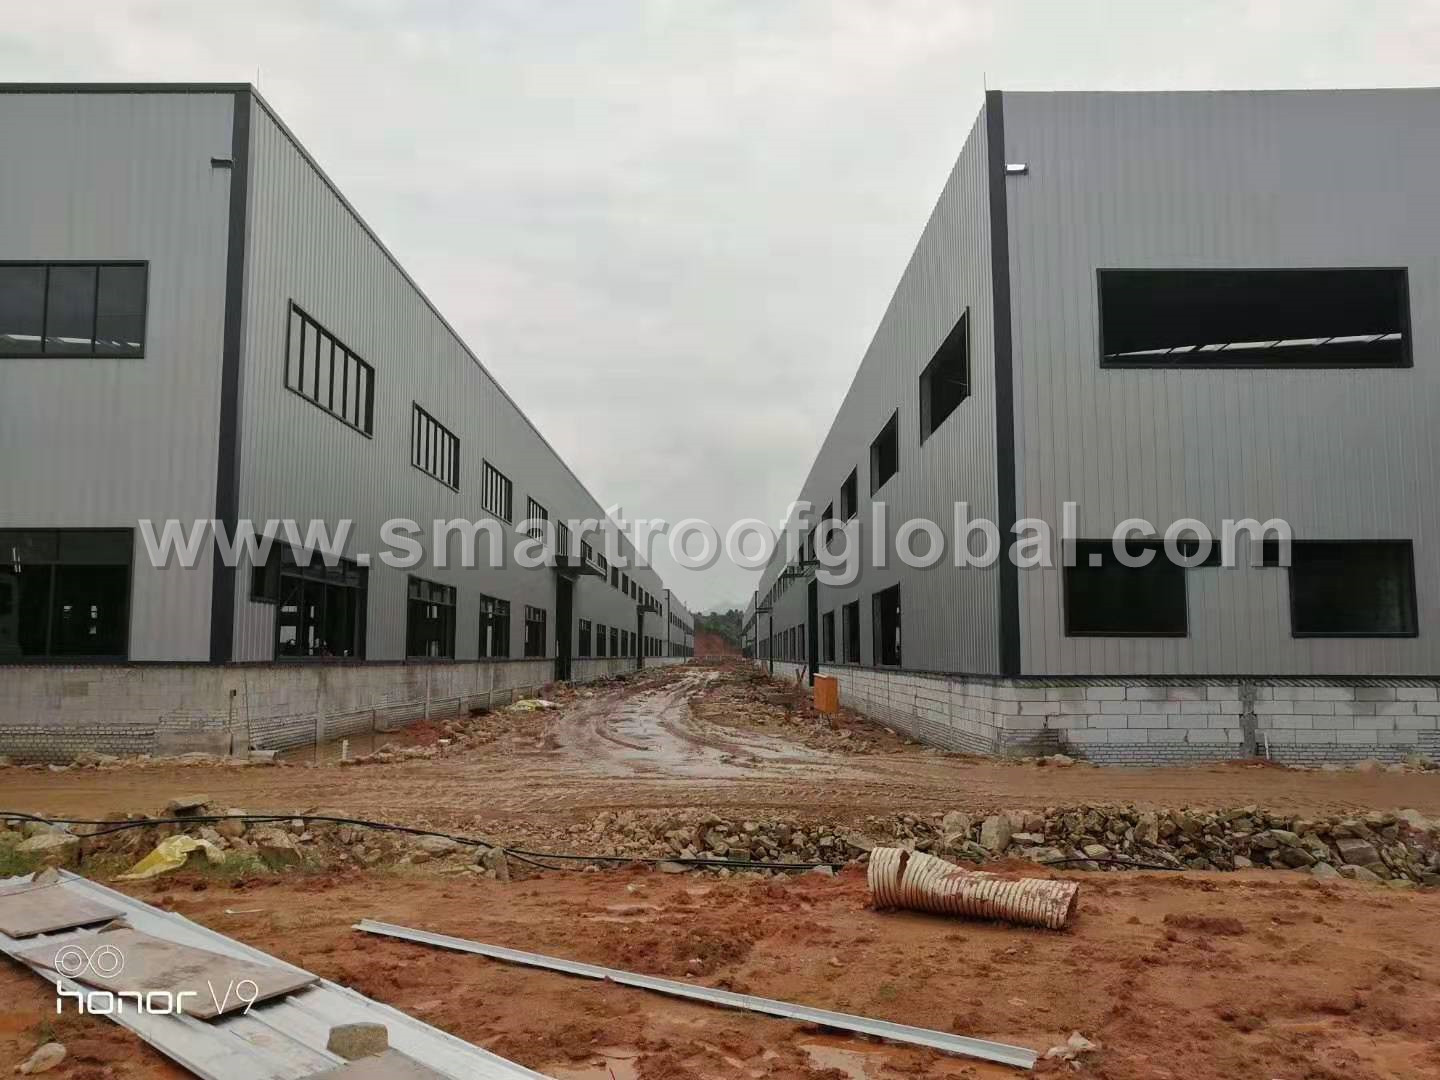 Factory Price For Alu-Zinc Roofing Tile - Galvanized Corrugated Metal Roofing – Smartroof